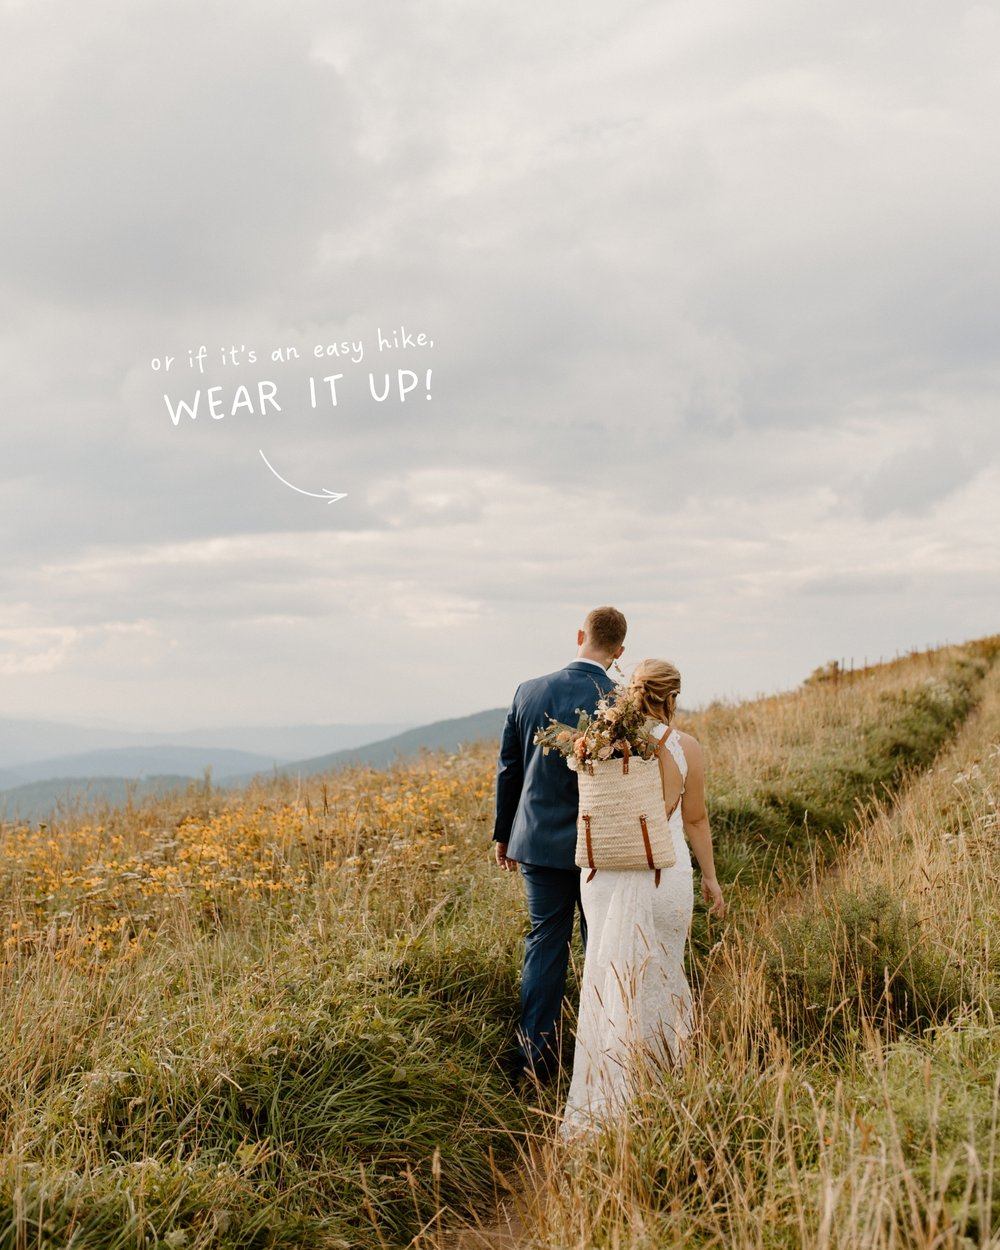 how-to-hike-with-wedding-dress-elopement-6.jpg